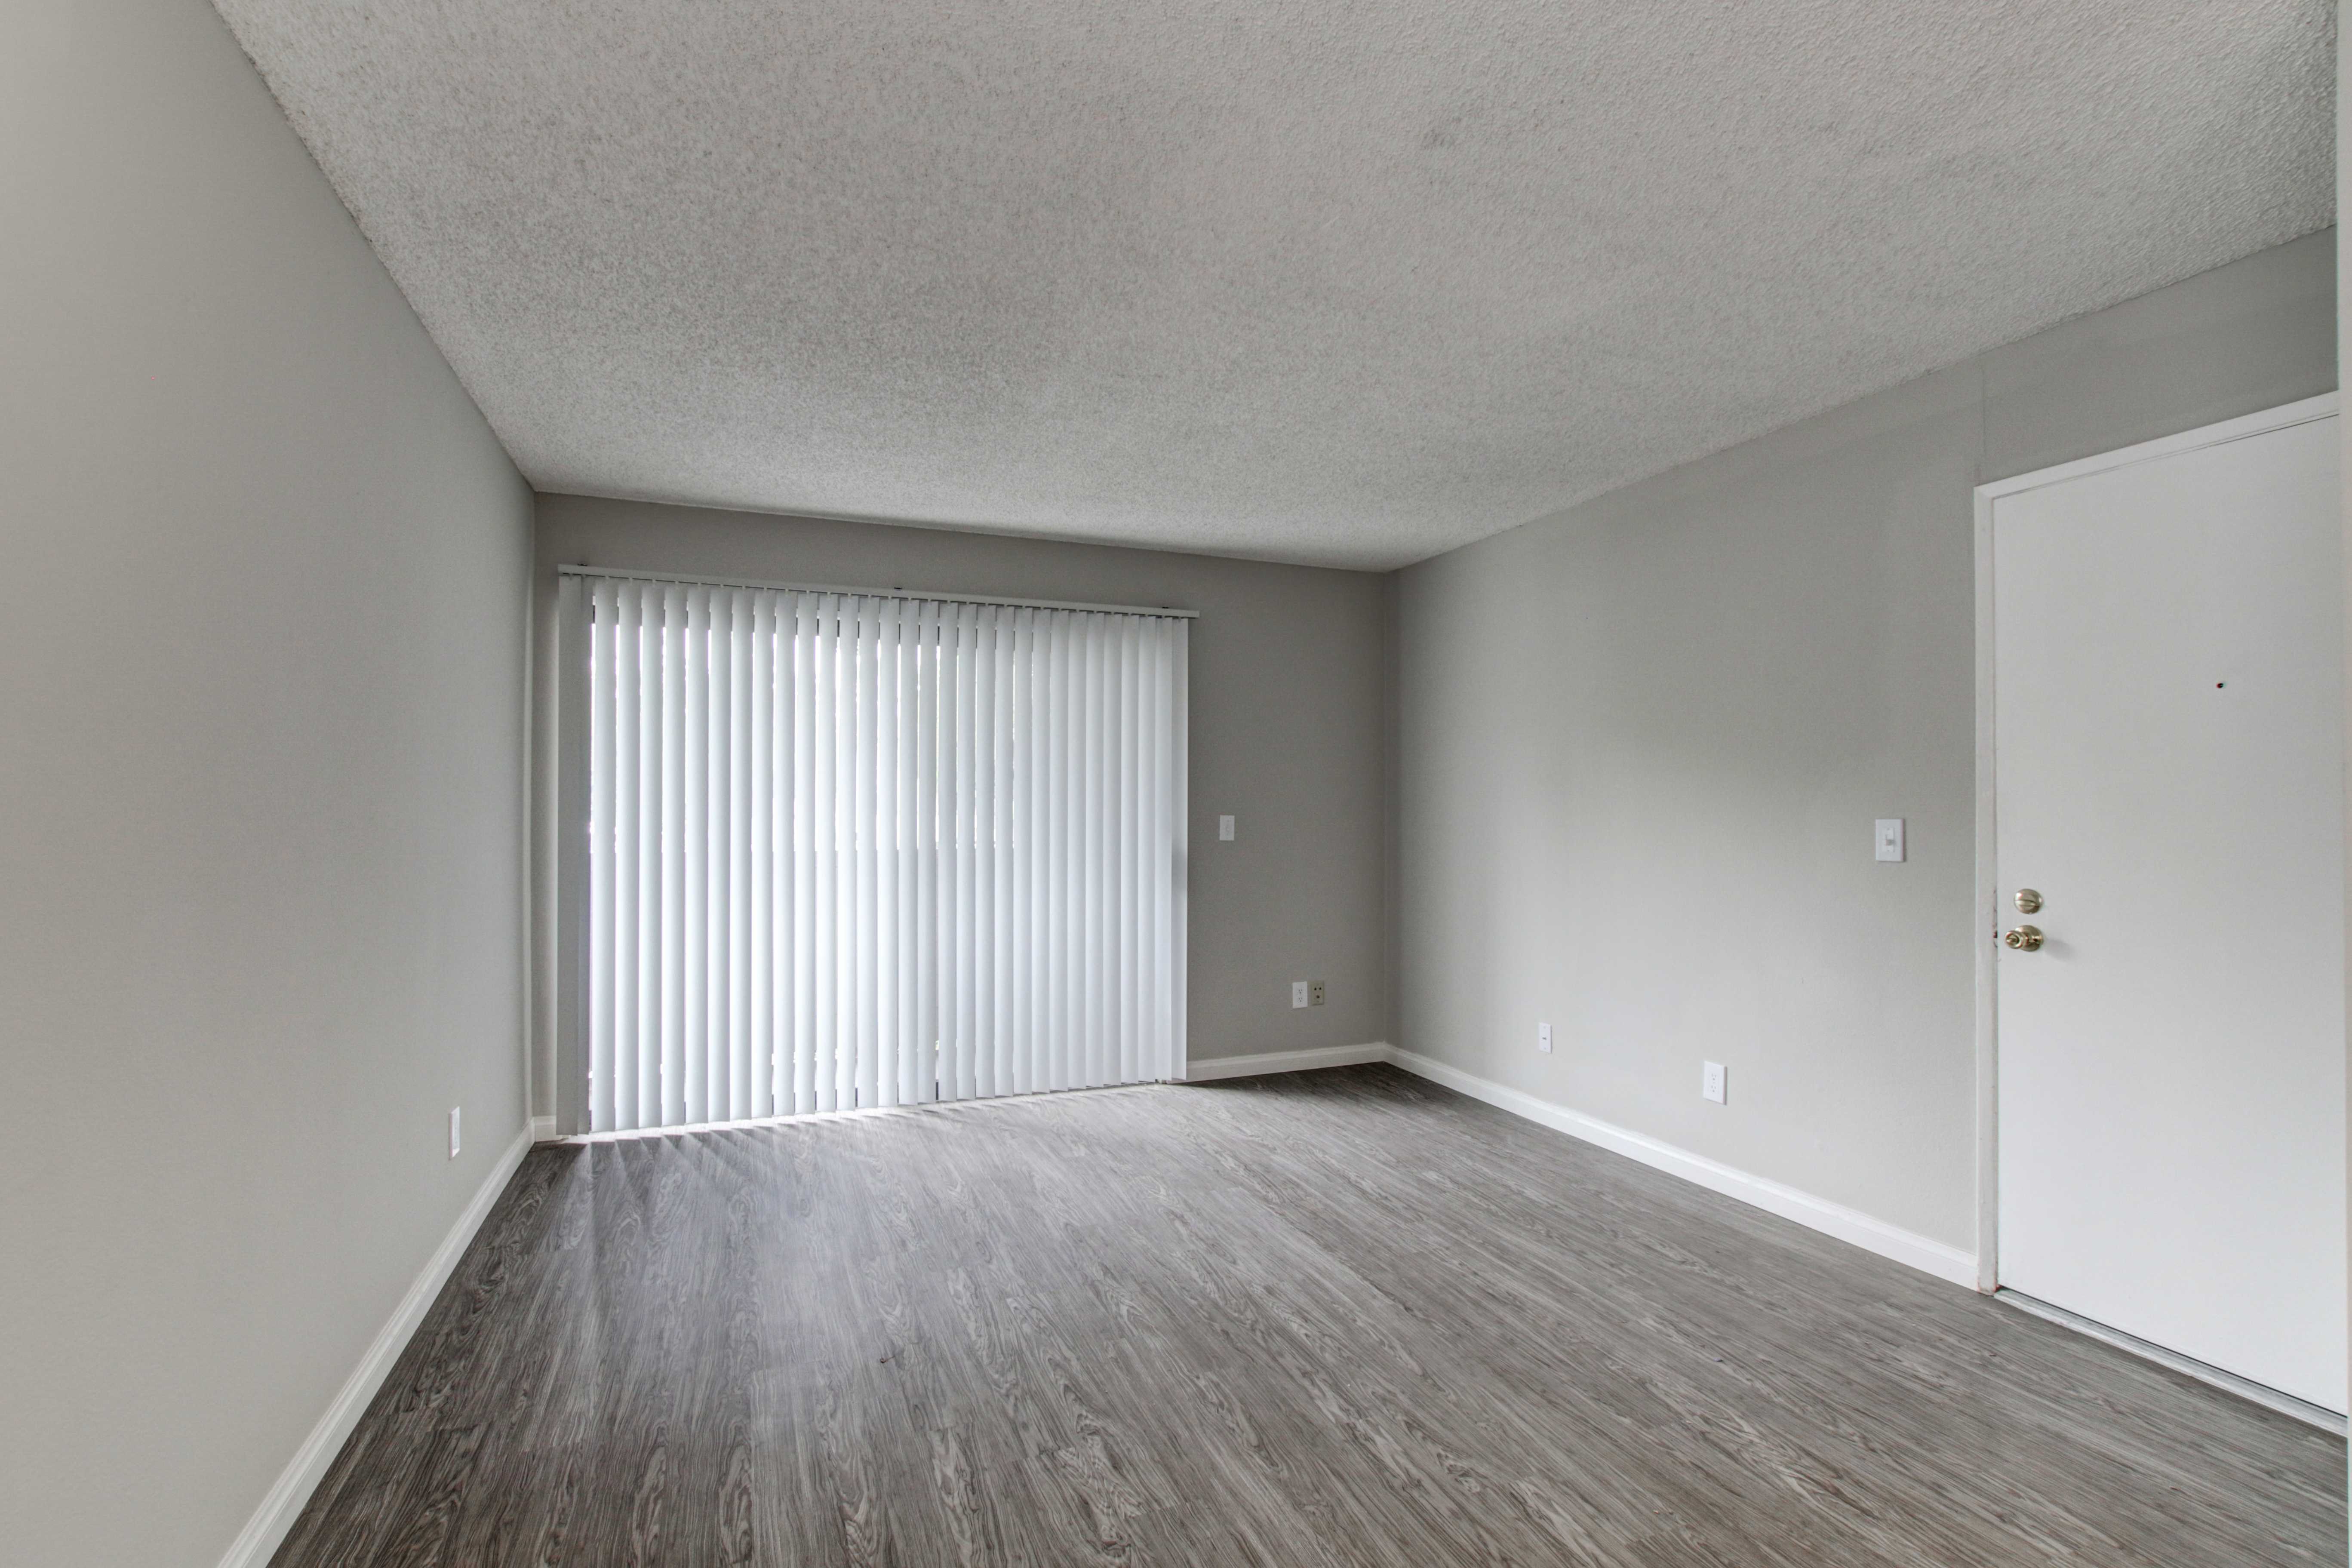 Inside space of a unit. Visible is a large window with vertical blinds, door, multiple outlets, and wooden floors.